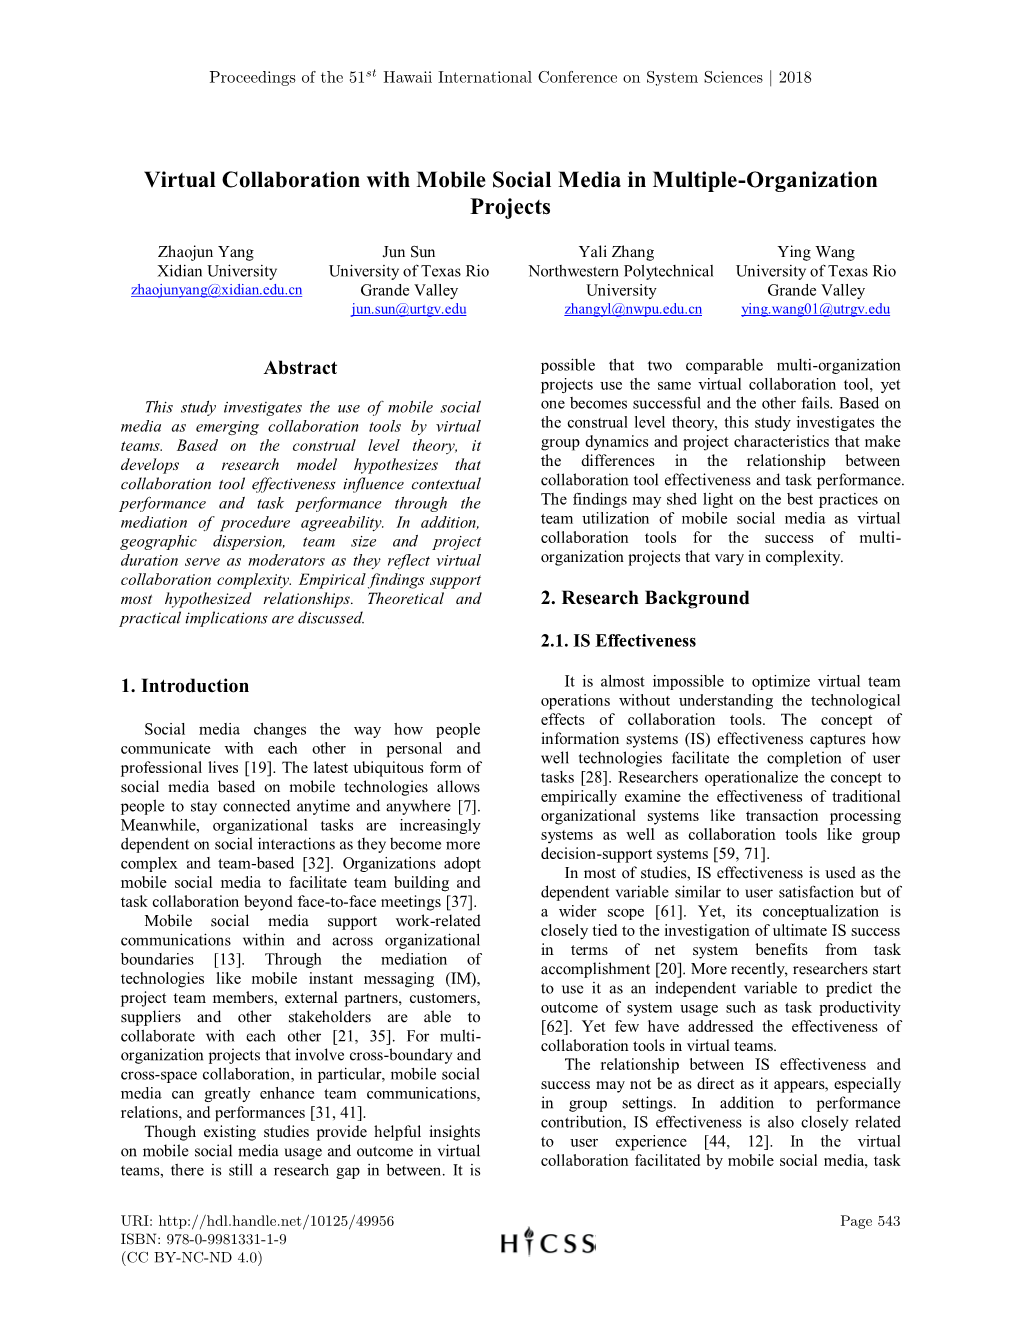 Virtual Collaboration with Mobile Social Media in Multiple-Organization Projects